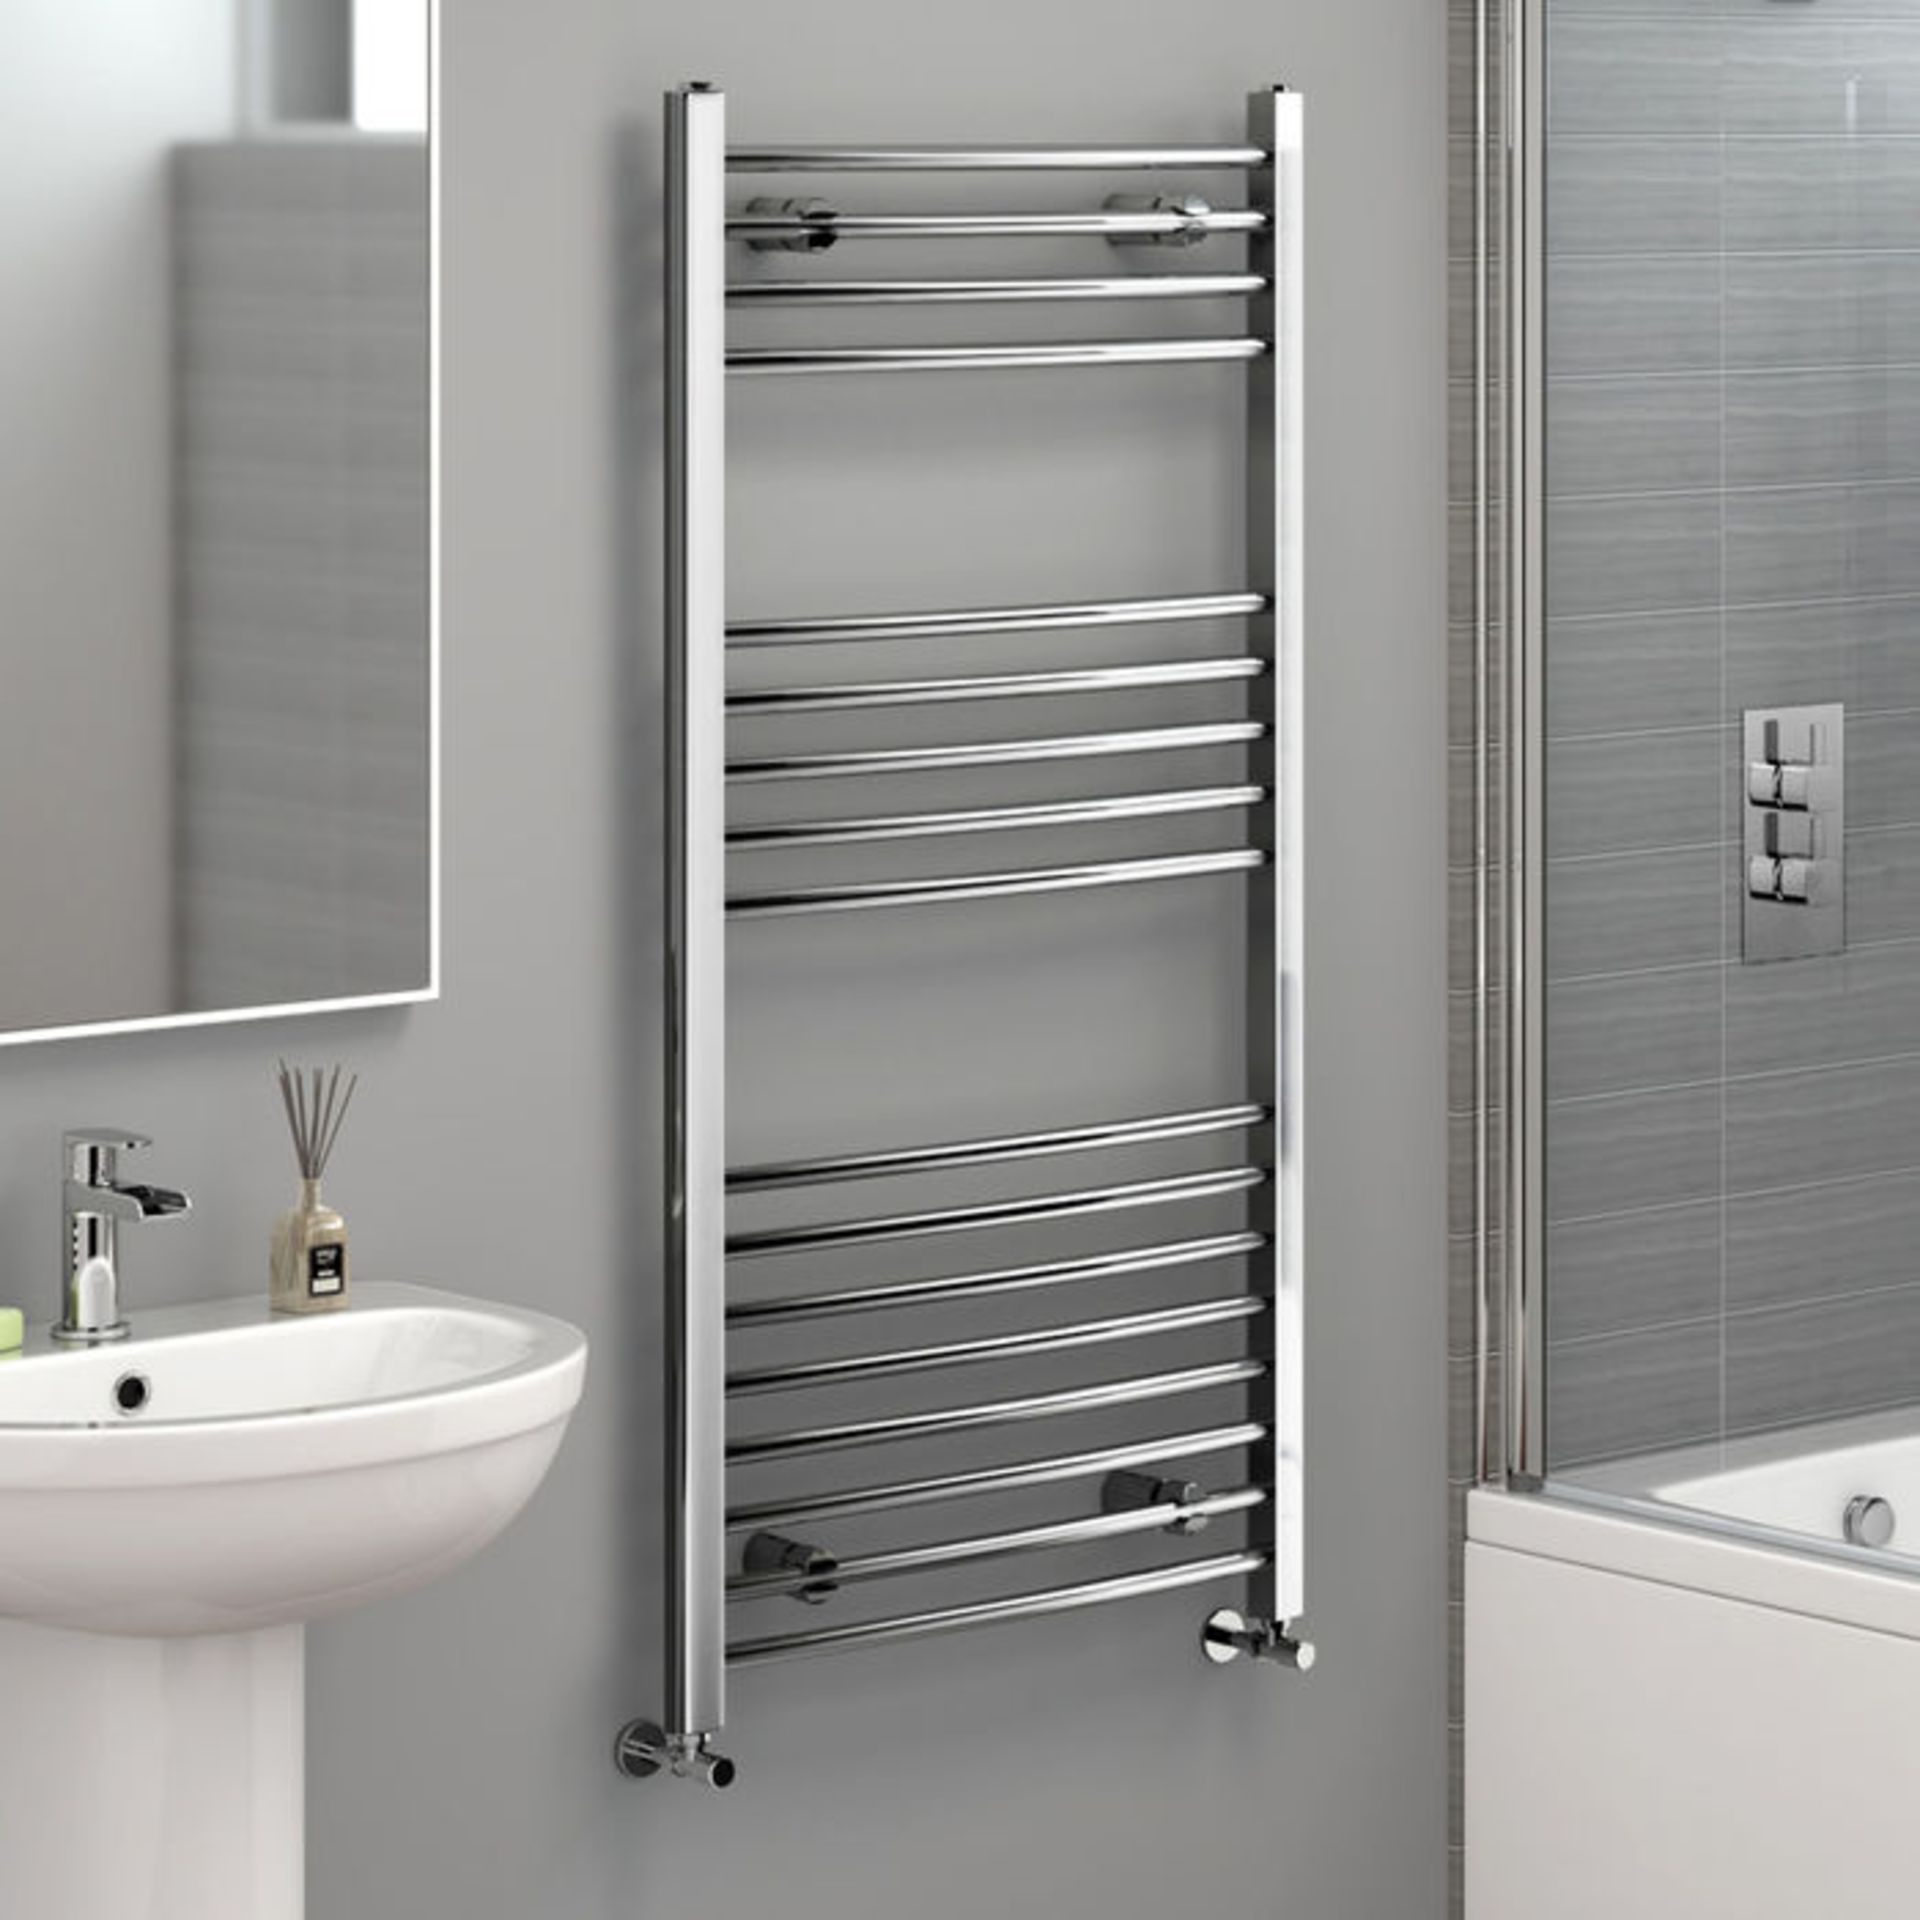 (TS252) 1200x600mm - 20mm Tubes - Chrome Curved Rail Ladder Towel Radiator. Made from chrome